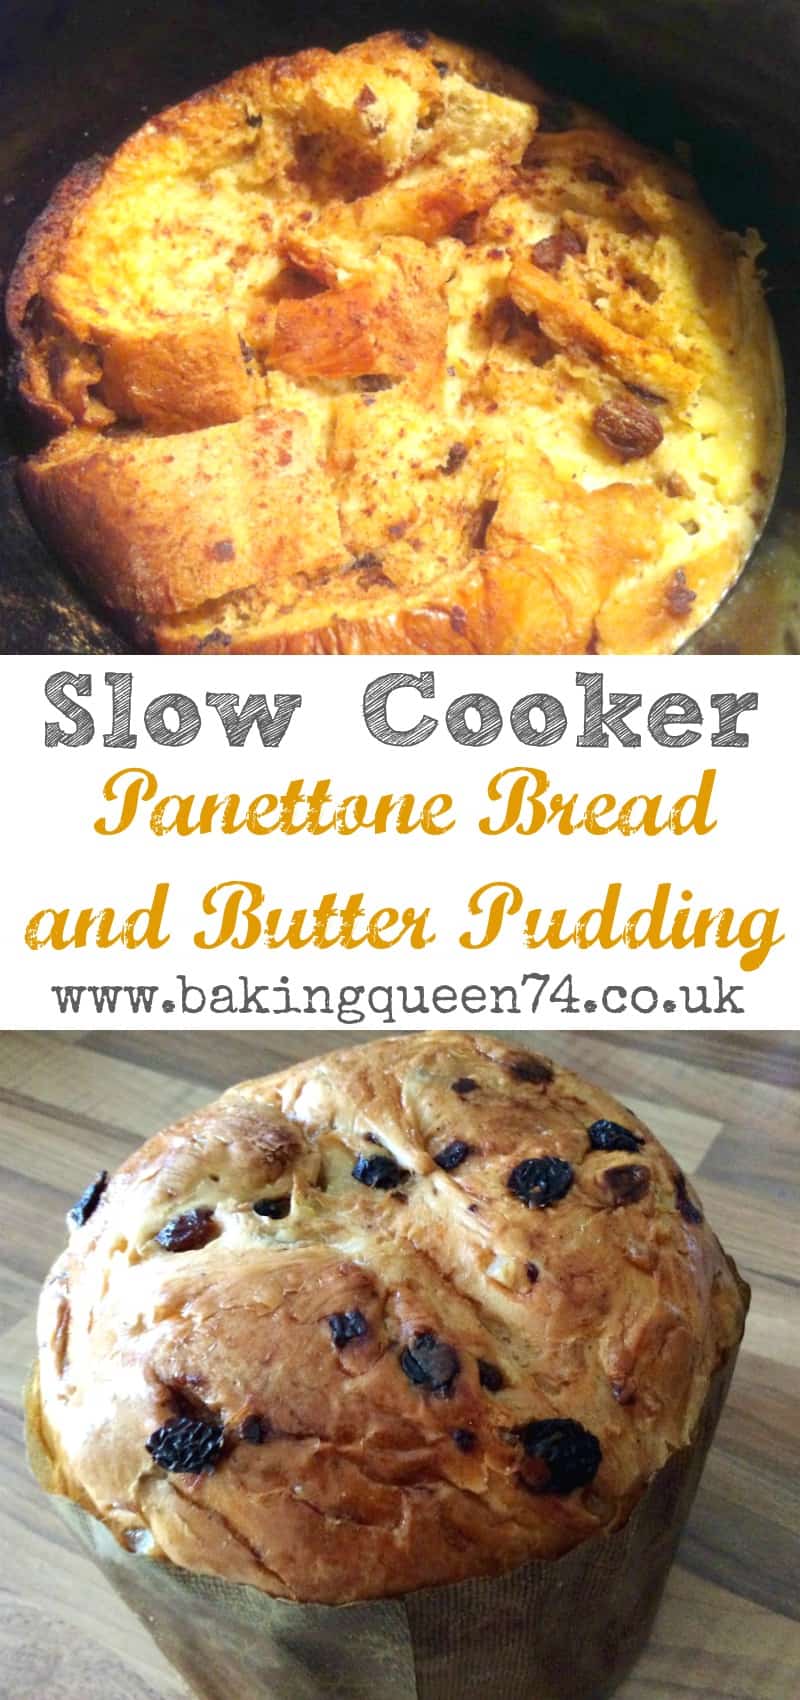 Slow Cooker Panettone Bread and Butter Pudding - BakingQueen74